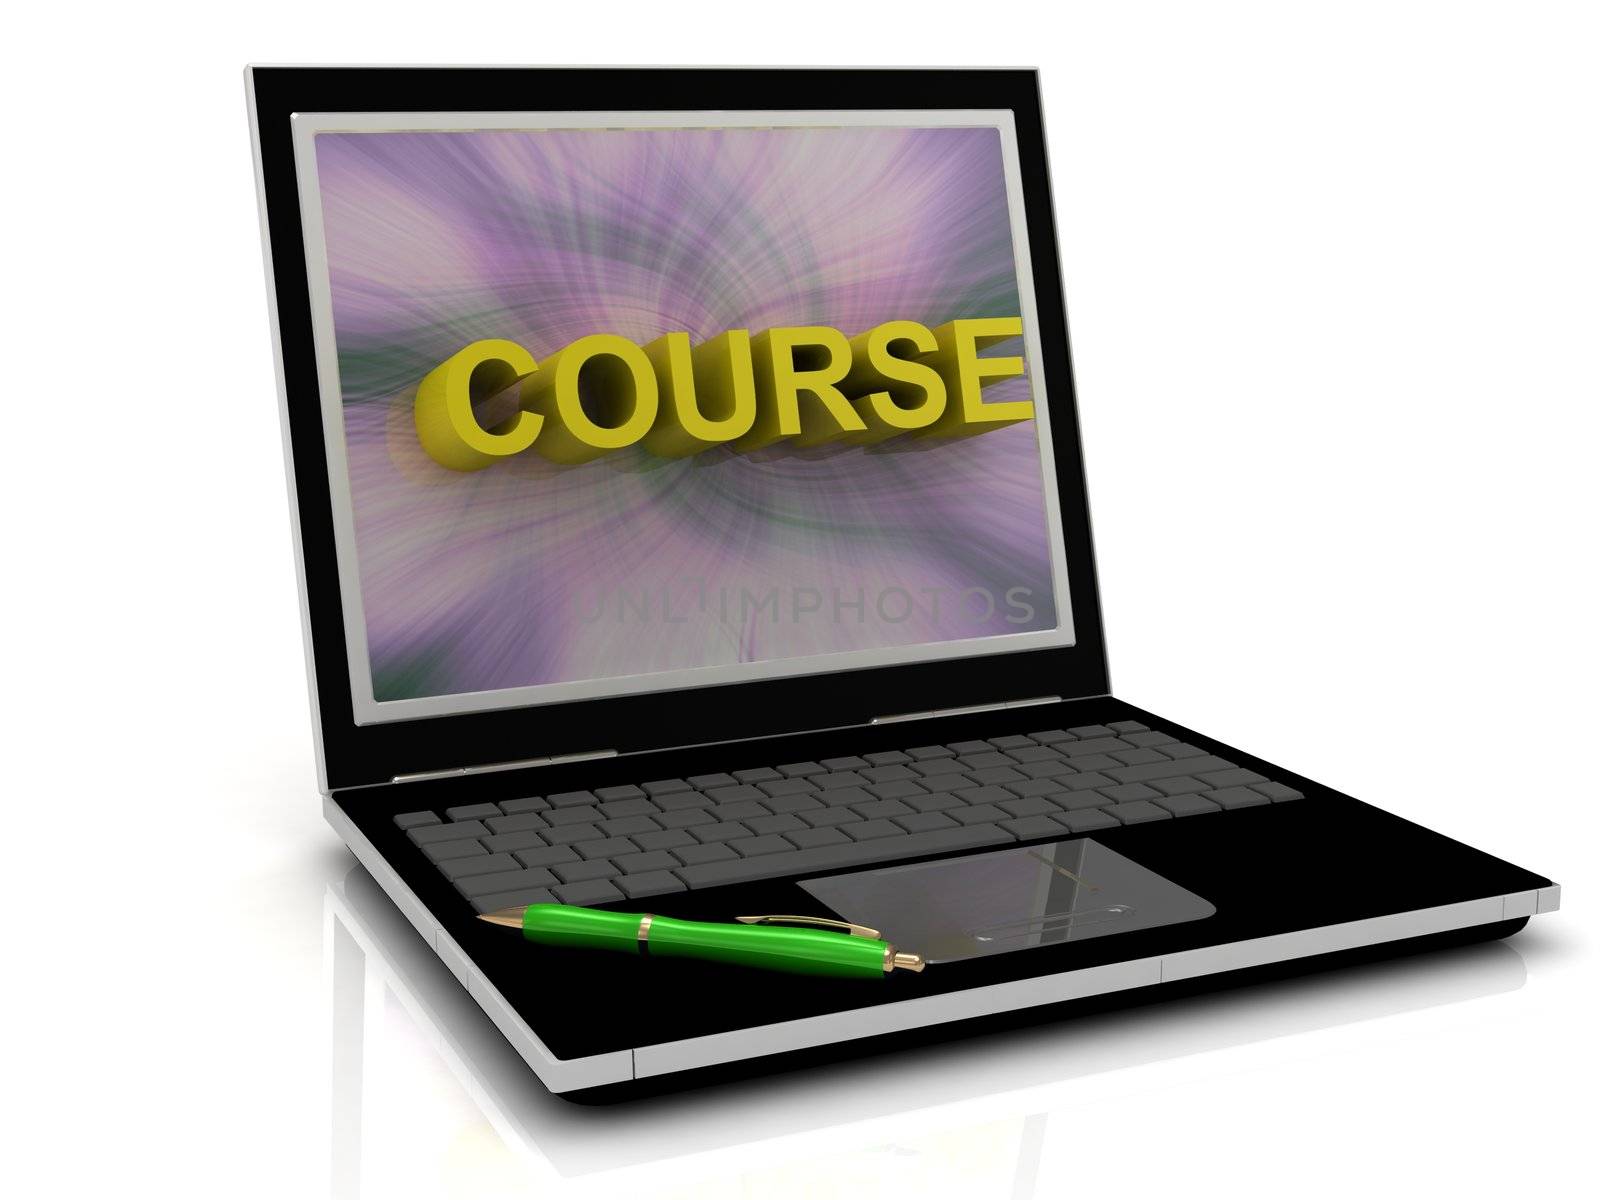 COURSE message on laptop screen by GreenMost